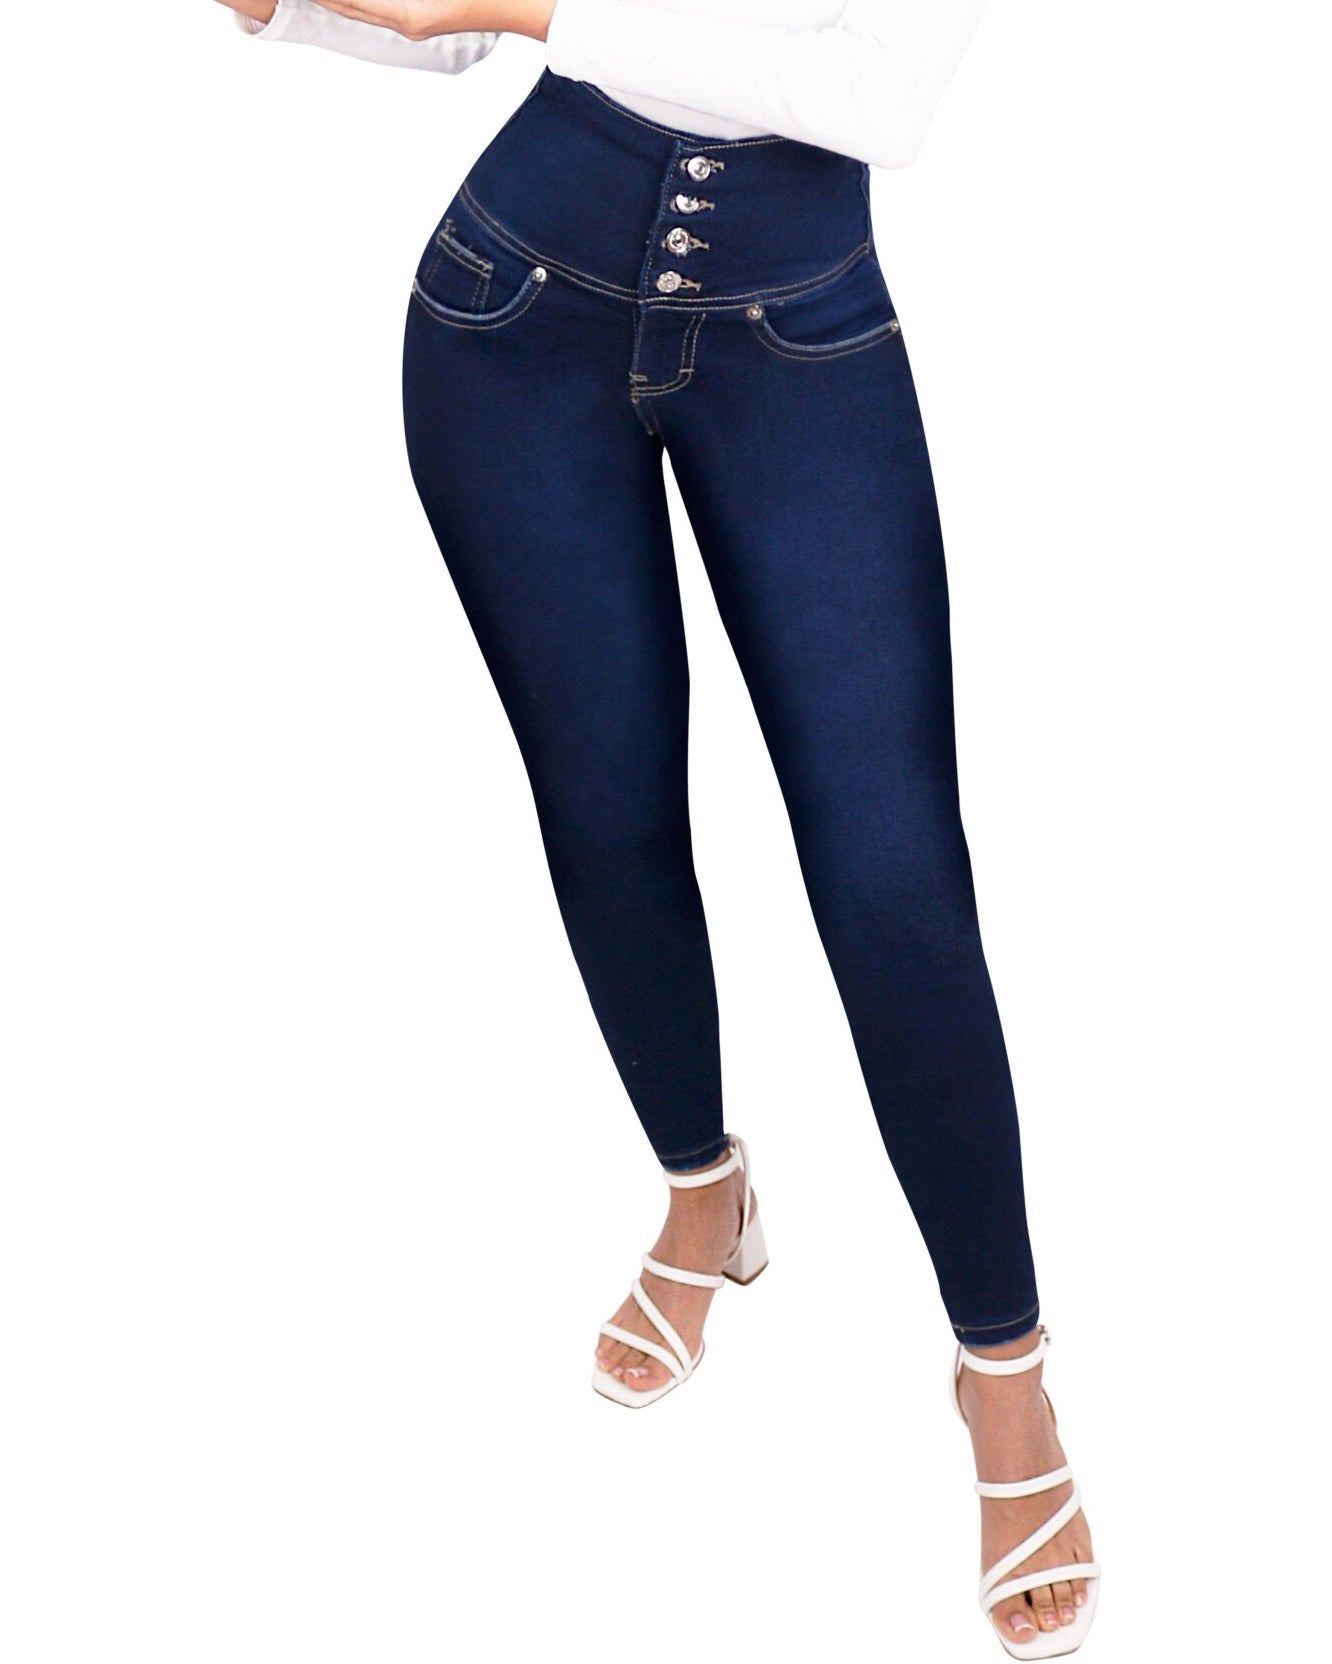 🔥Curve Jeans Butt Lift Slim✨Buy 2 Free Shipping